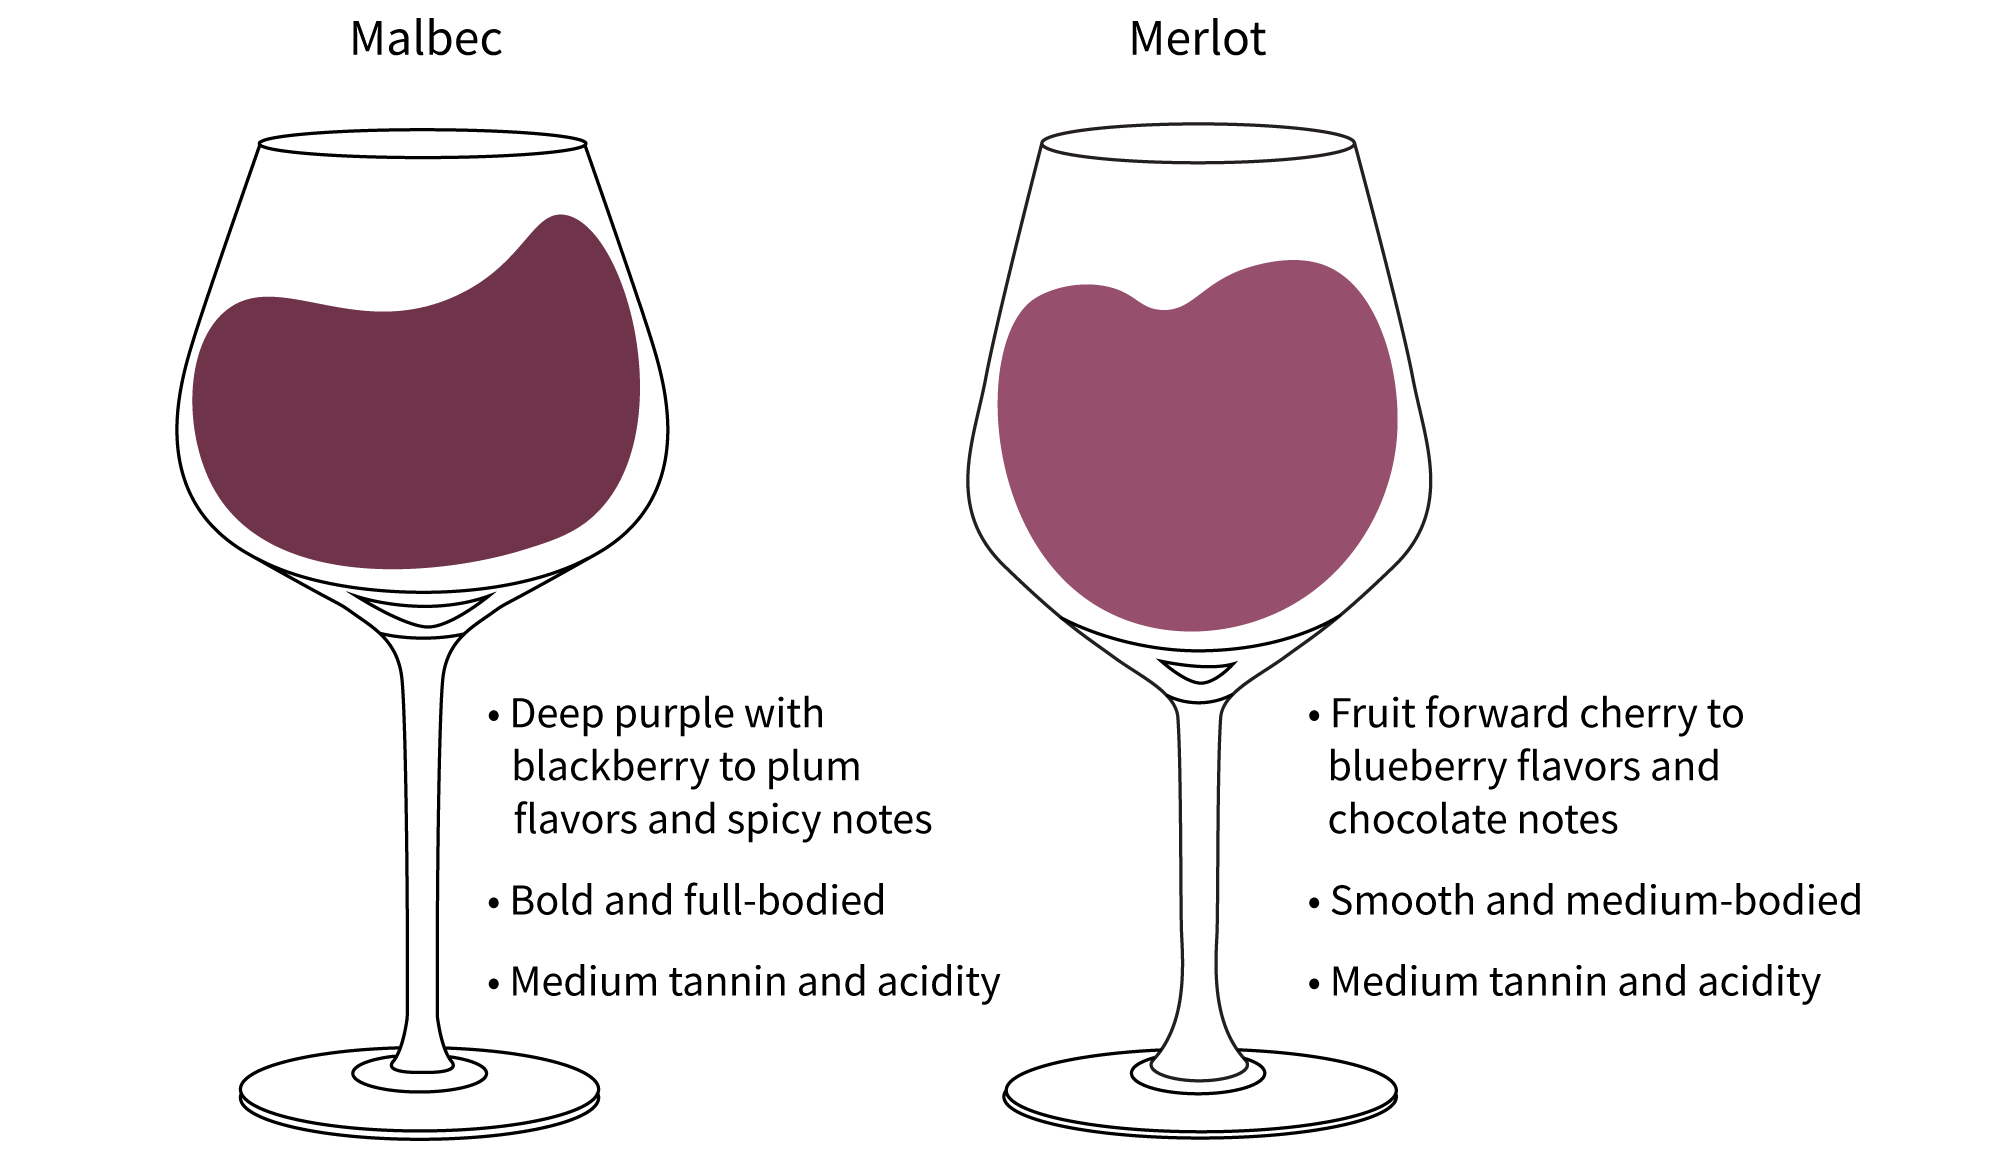 malbec: deep purple with blackberry to plum flavors and spicy notes; bold and full-bodies; medium tannins and acidity. merlot: fruit forward cherry to blueberry flavors and chocolate notes; smooth and medium-bodied; medium tannins and acidity